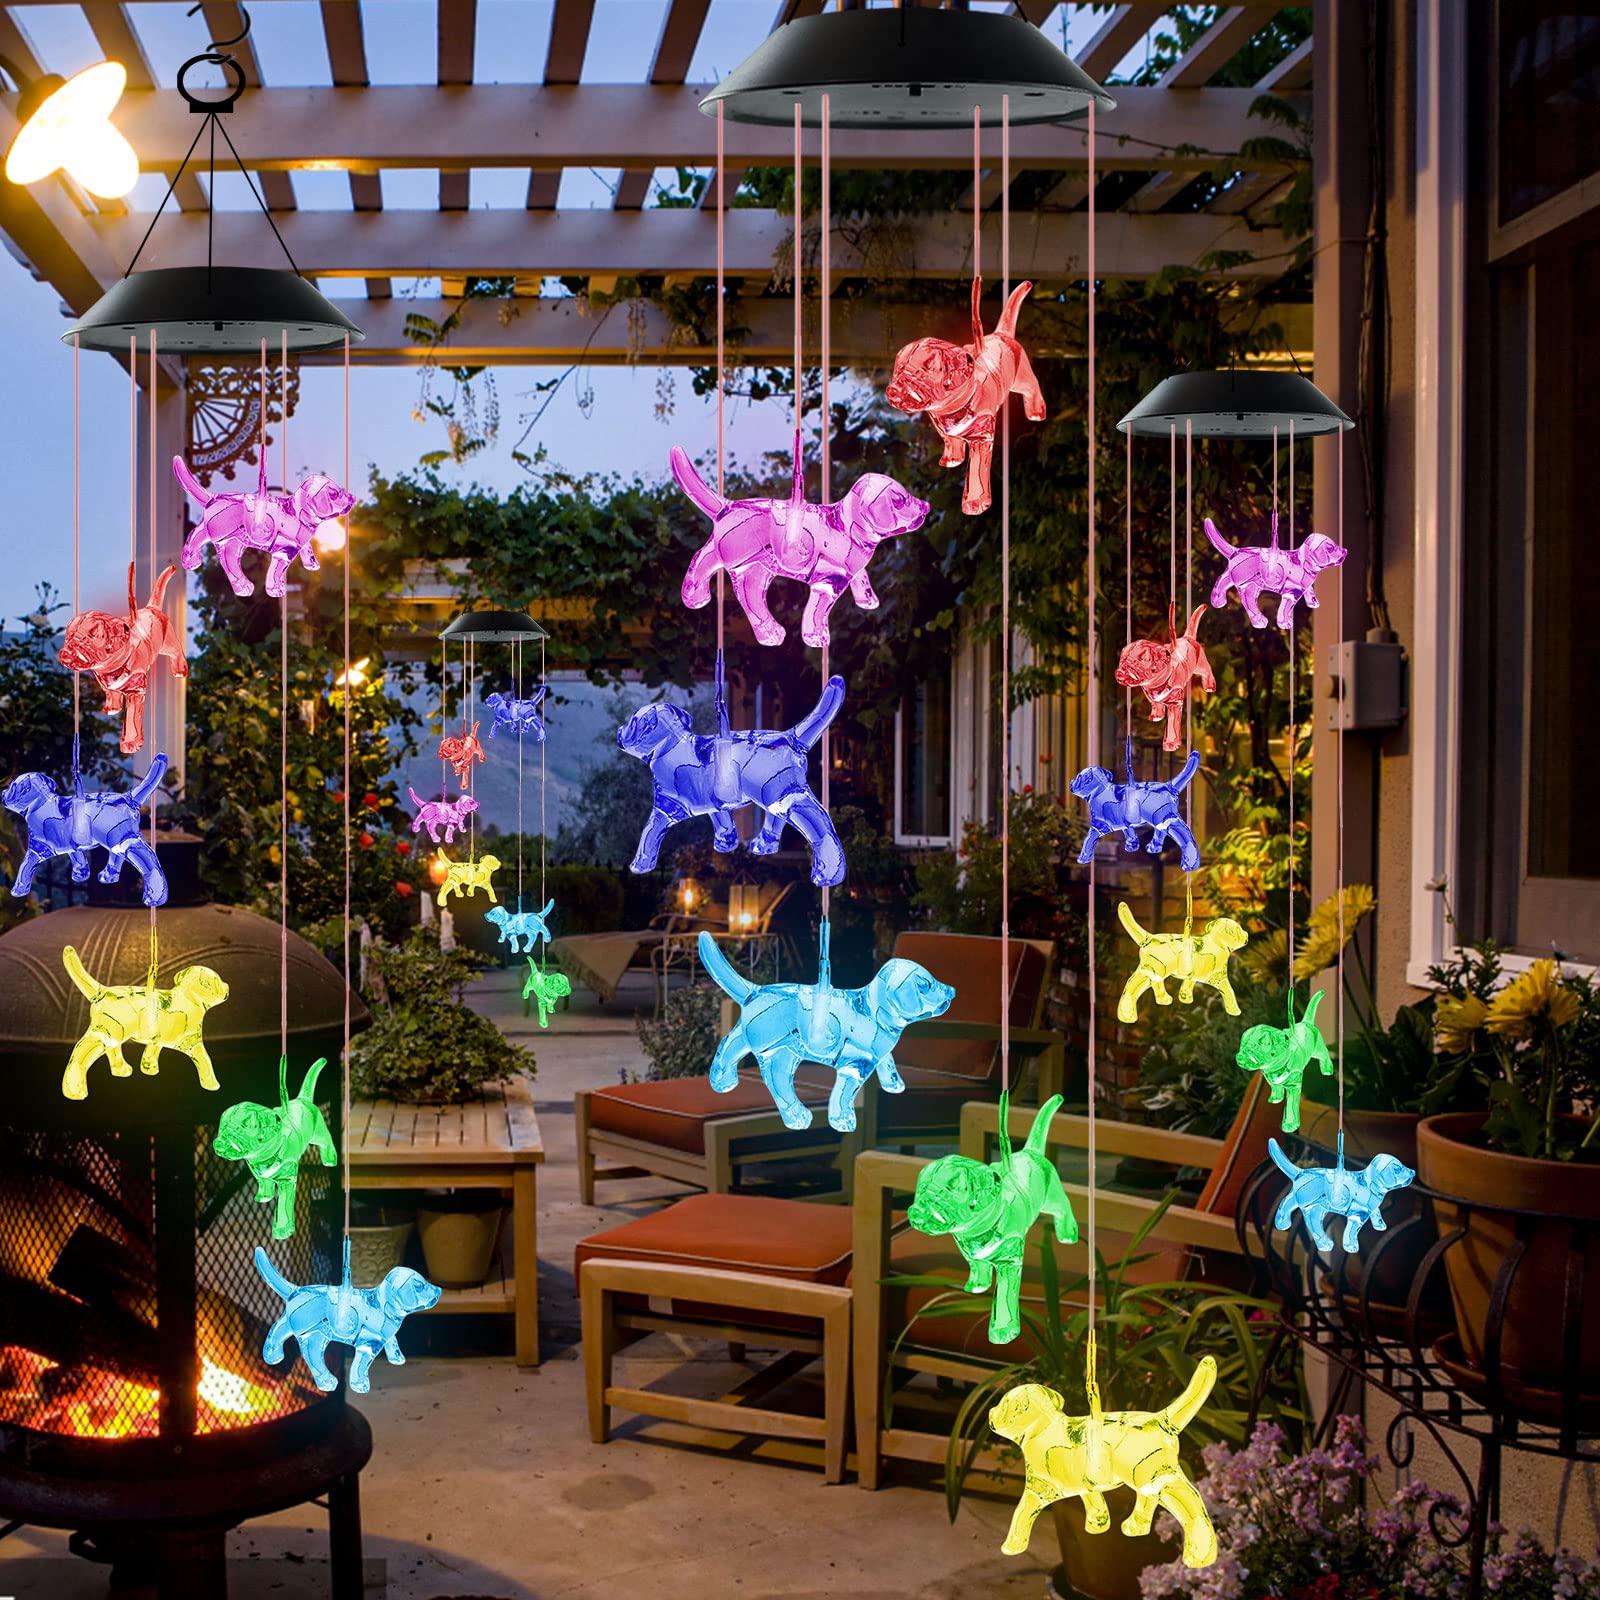 Vency Dog Solar String Lights Wind Chimes Pet Gifts Outdoor Mobile Colors Changing Labrador Solar Wind Chimes Ornaments Christmas Decorations LED Lights for Patio Yard Garden Home Decor